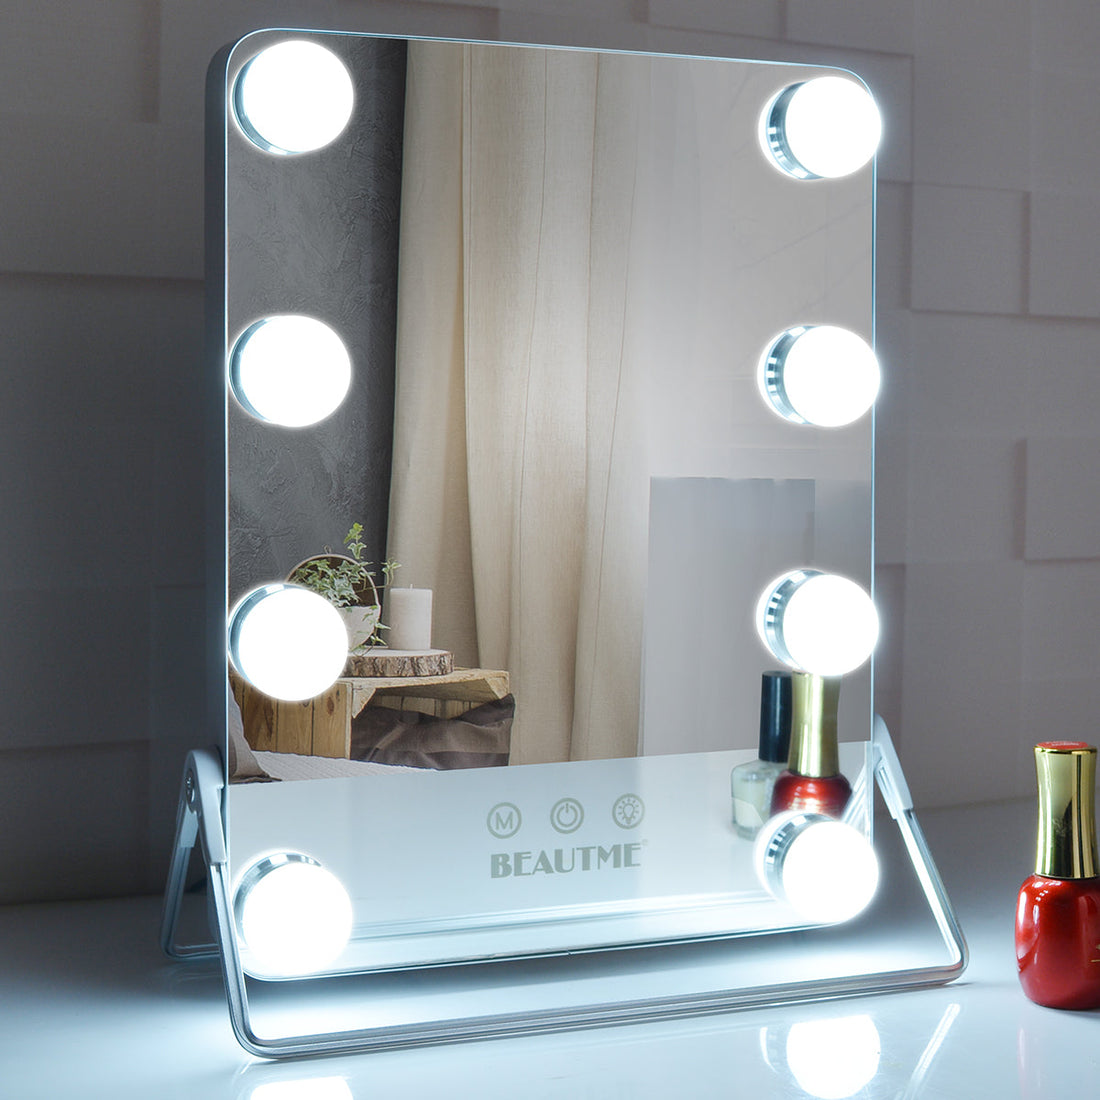 Hollywood Makeup Vanity Mirror with Lights, 3 Color Lighting Modes with 8 Dimmable Bulbs ,Lighted Cosmetic Mirror for Dressing ,Rotation Silver